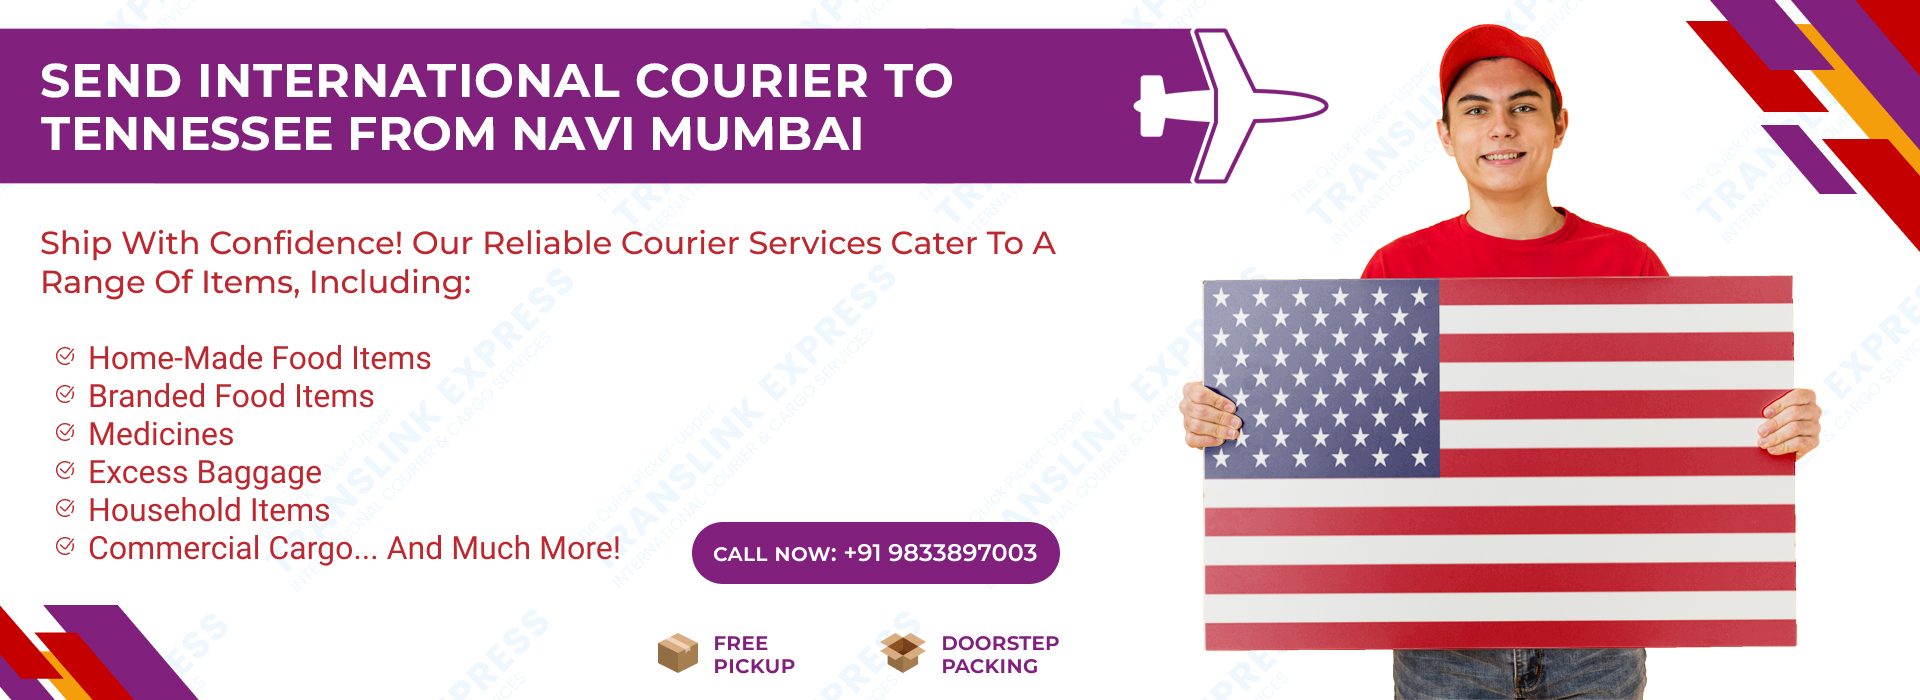 Courier to Tennessee From Navi Mumbai